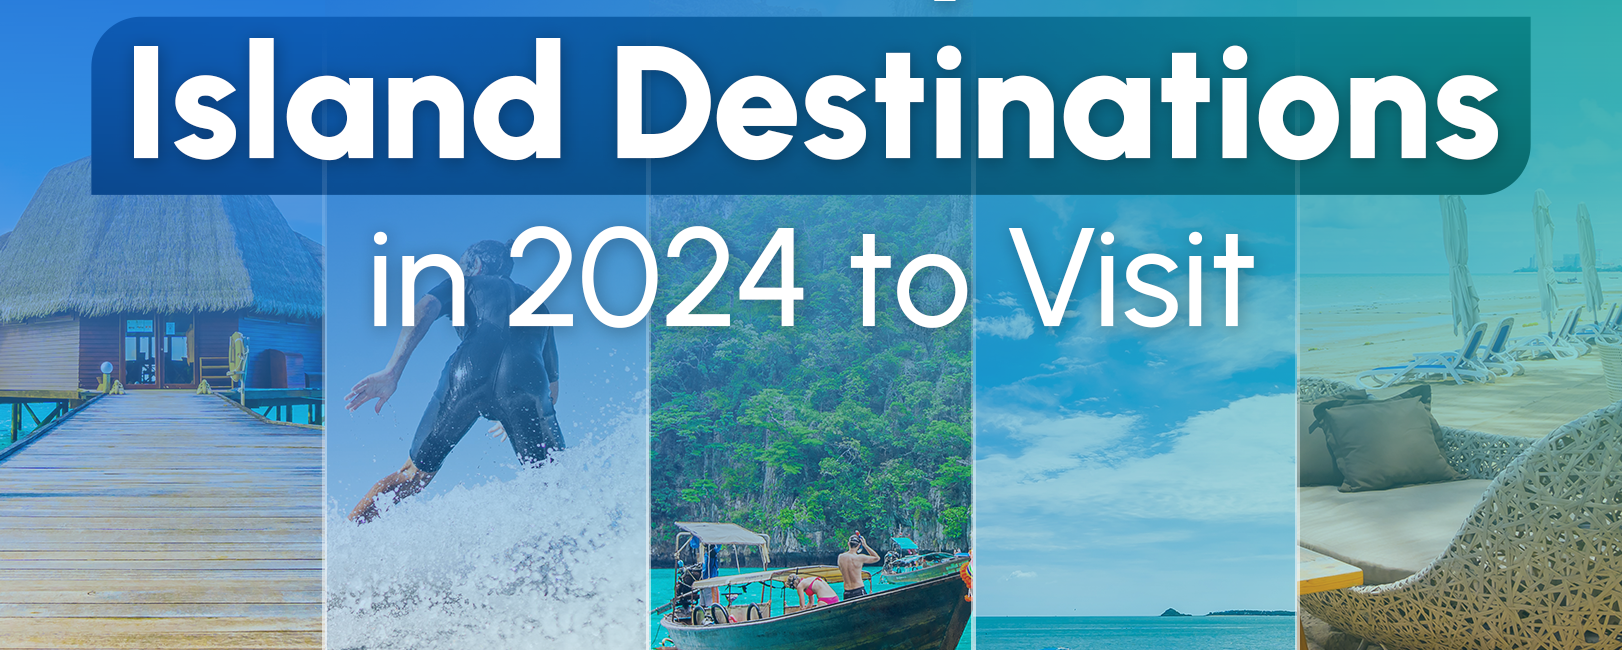 the-top-5-island-destinations-in-2024-to-visit